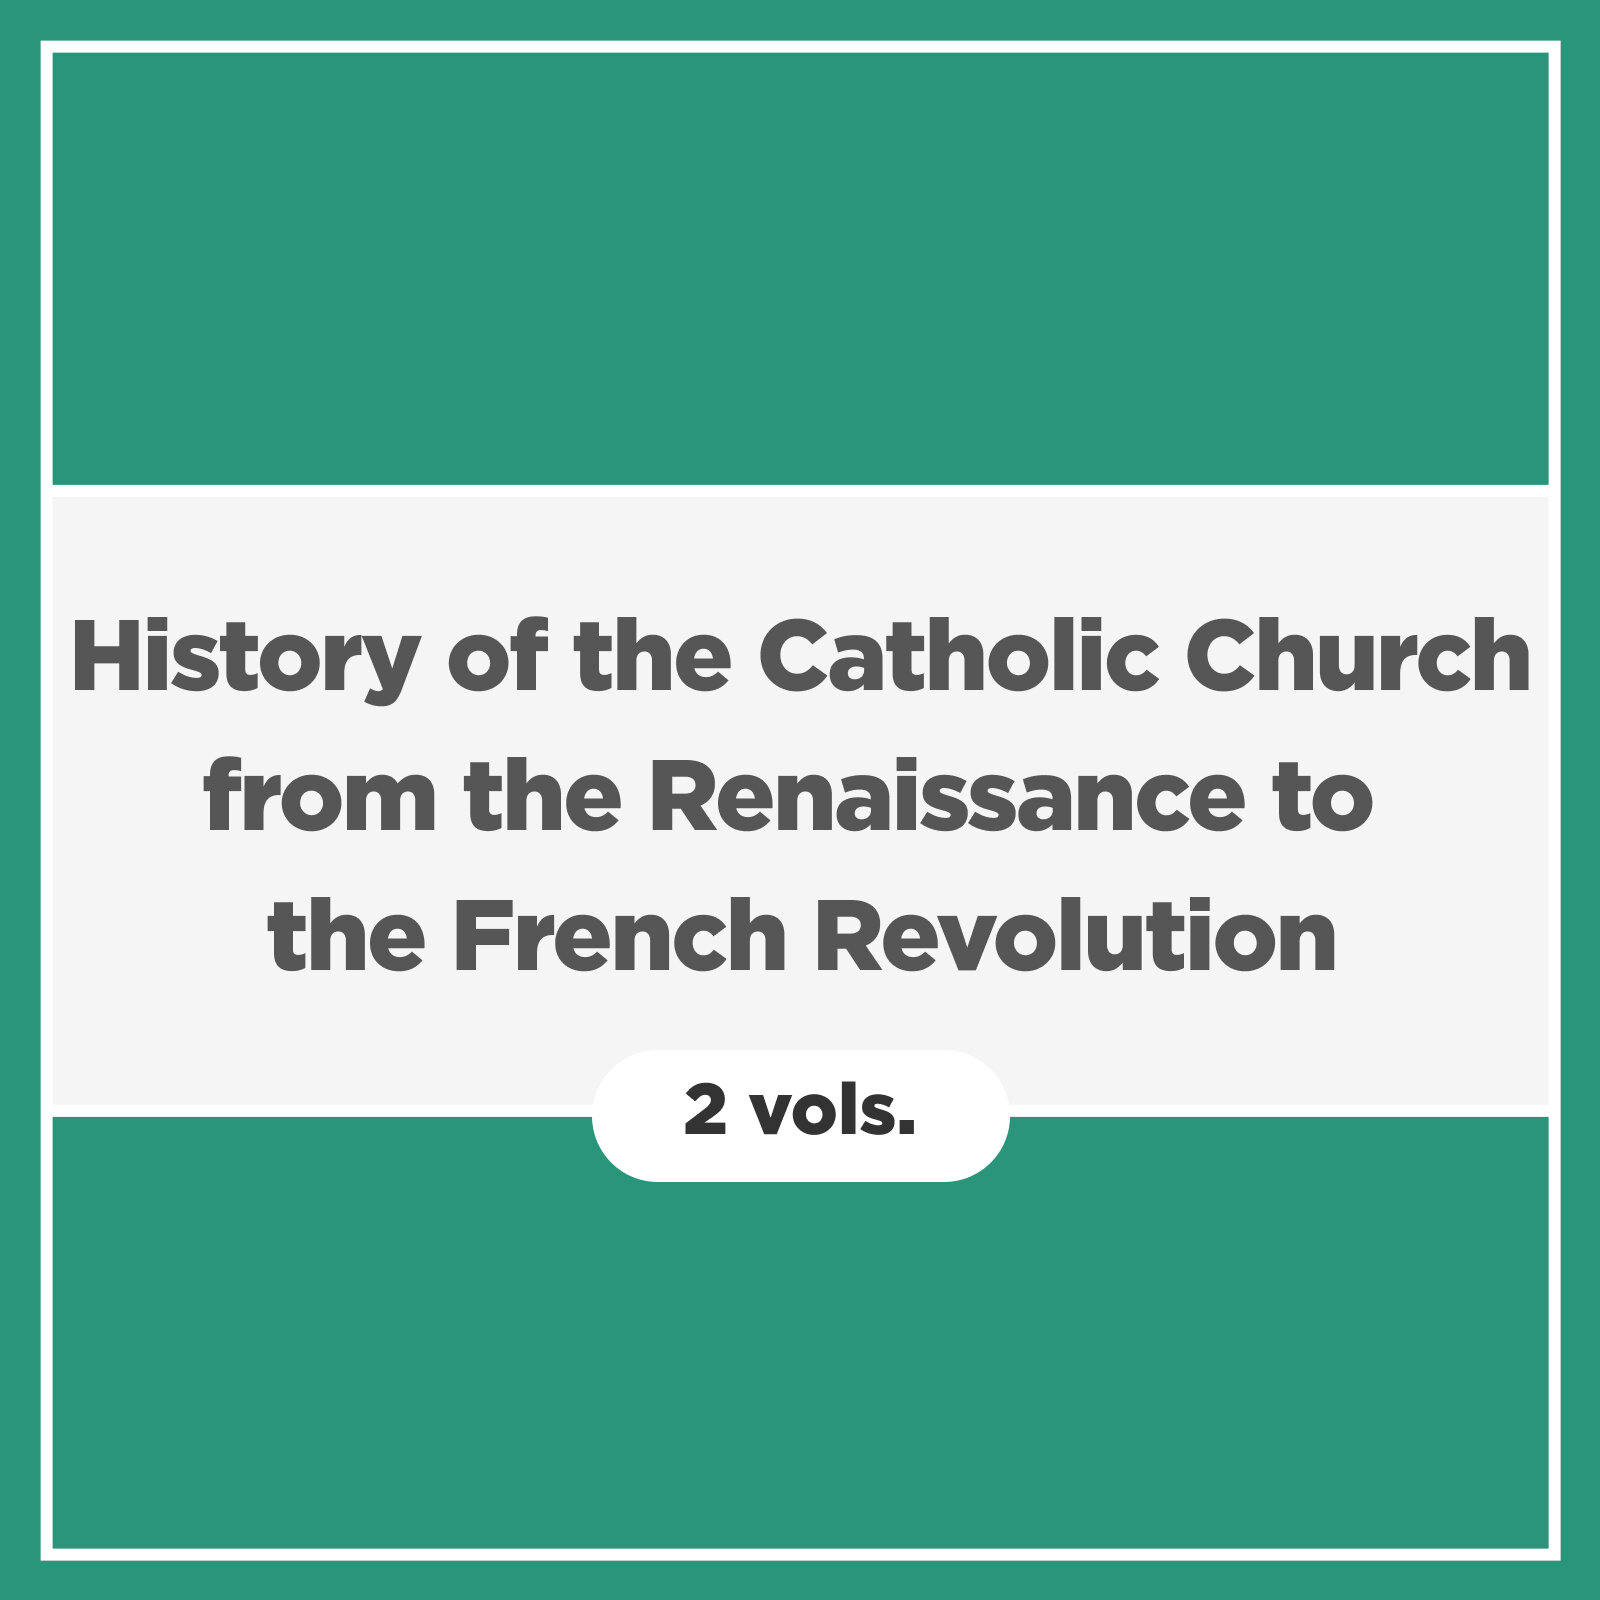 History of the Catholic Church from the Renaissance to the French Revolution (2 vols.)